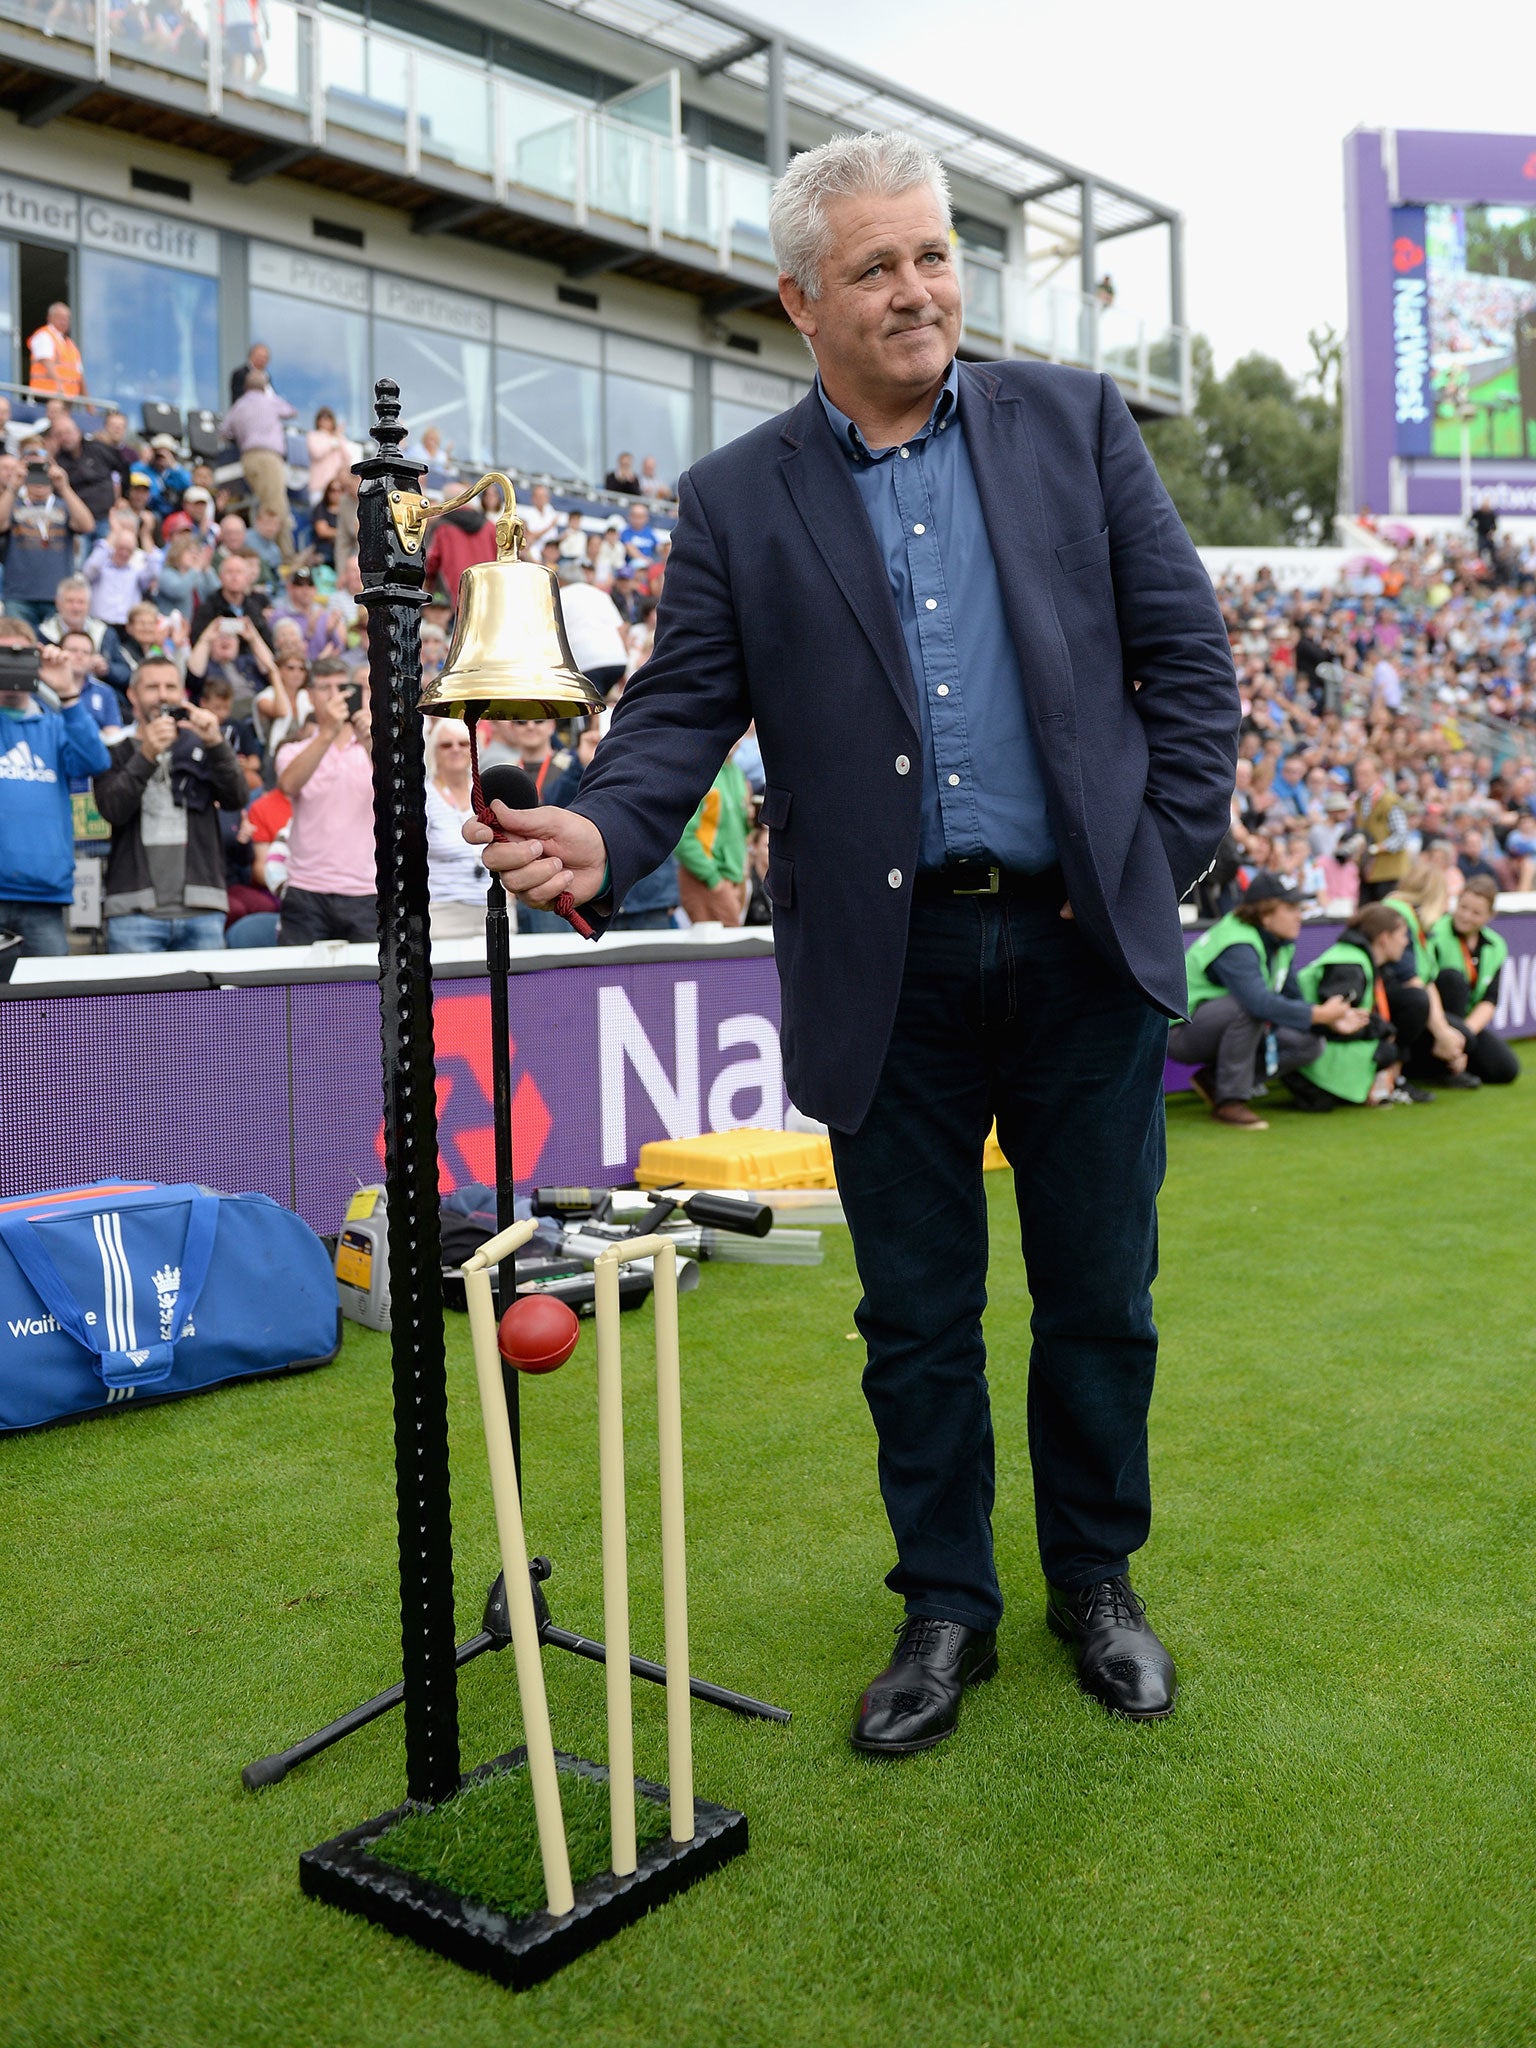 Warren Gatland rings the five-minute bell at the Twenty20 game between England and Australia at Sophia Gardens